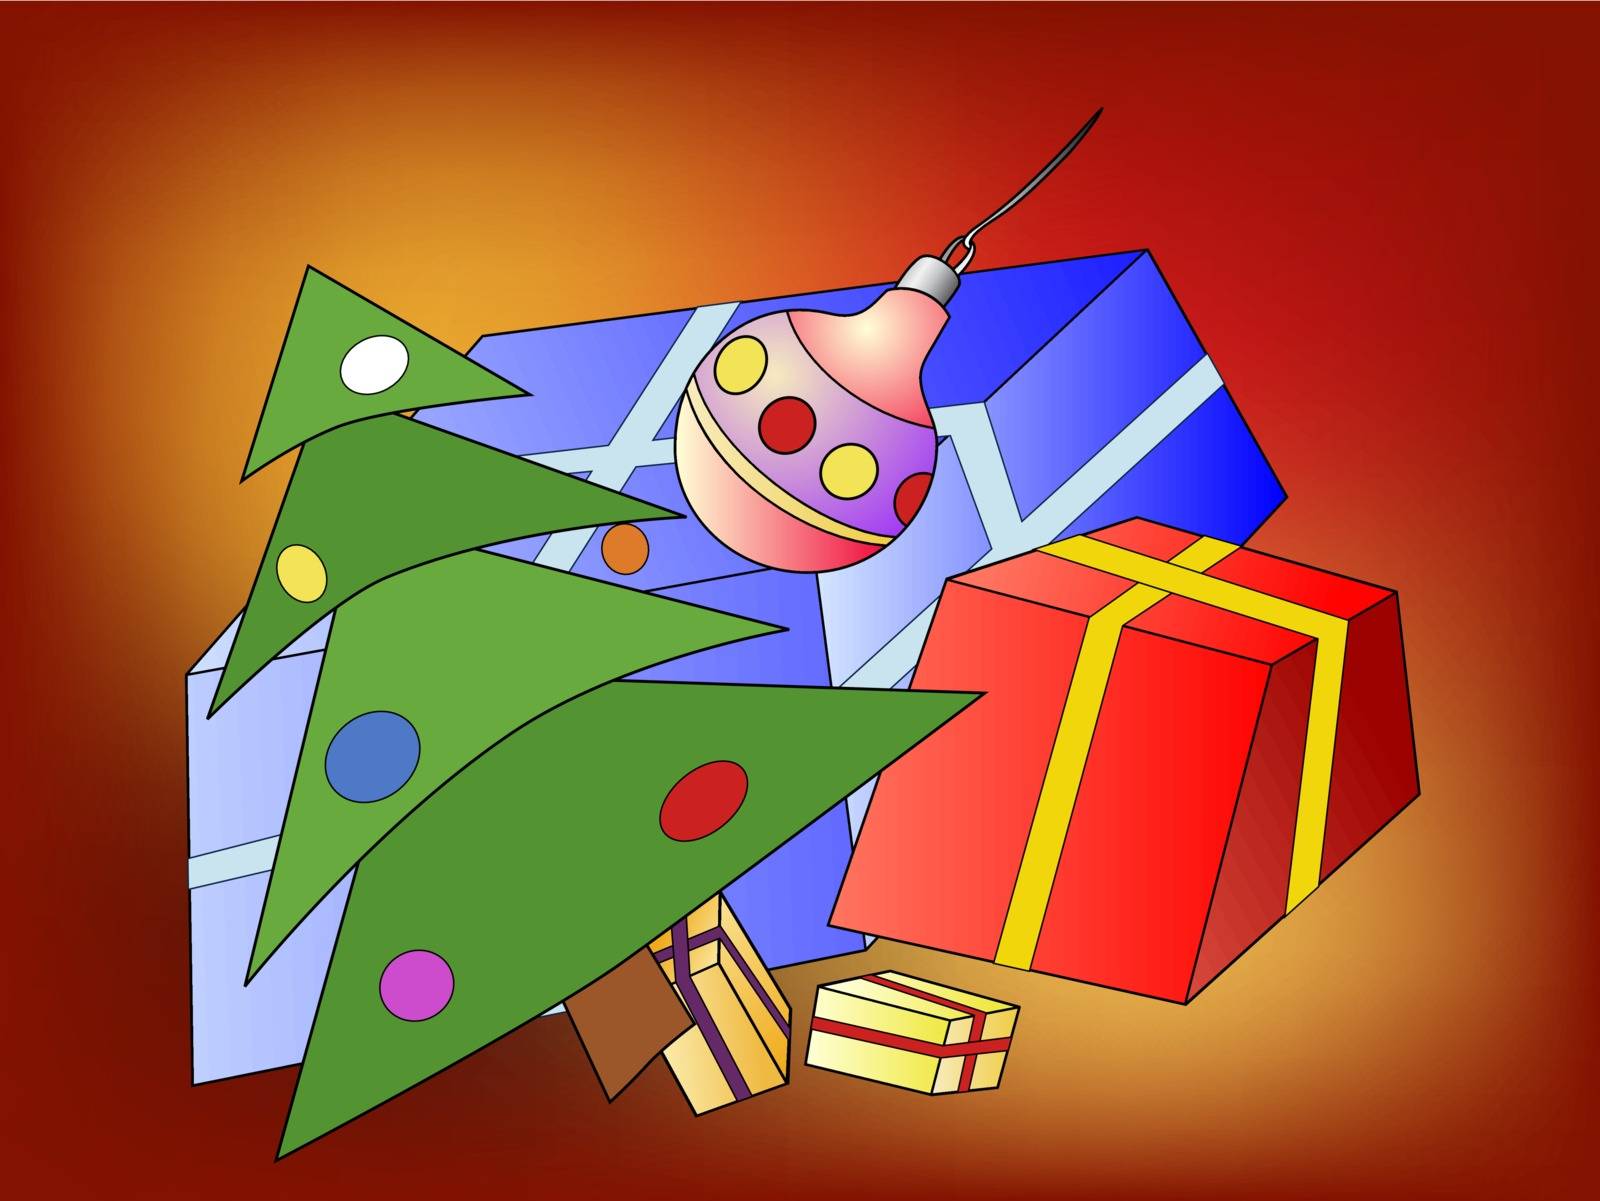 Christmas tree and Christmas presents by Mibuch